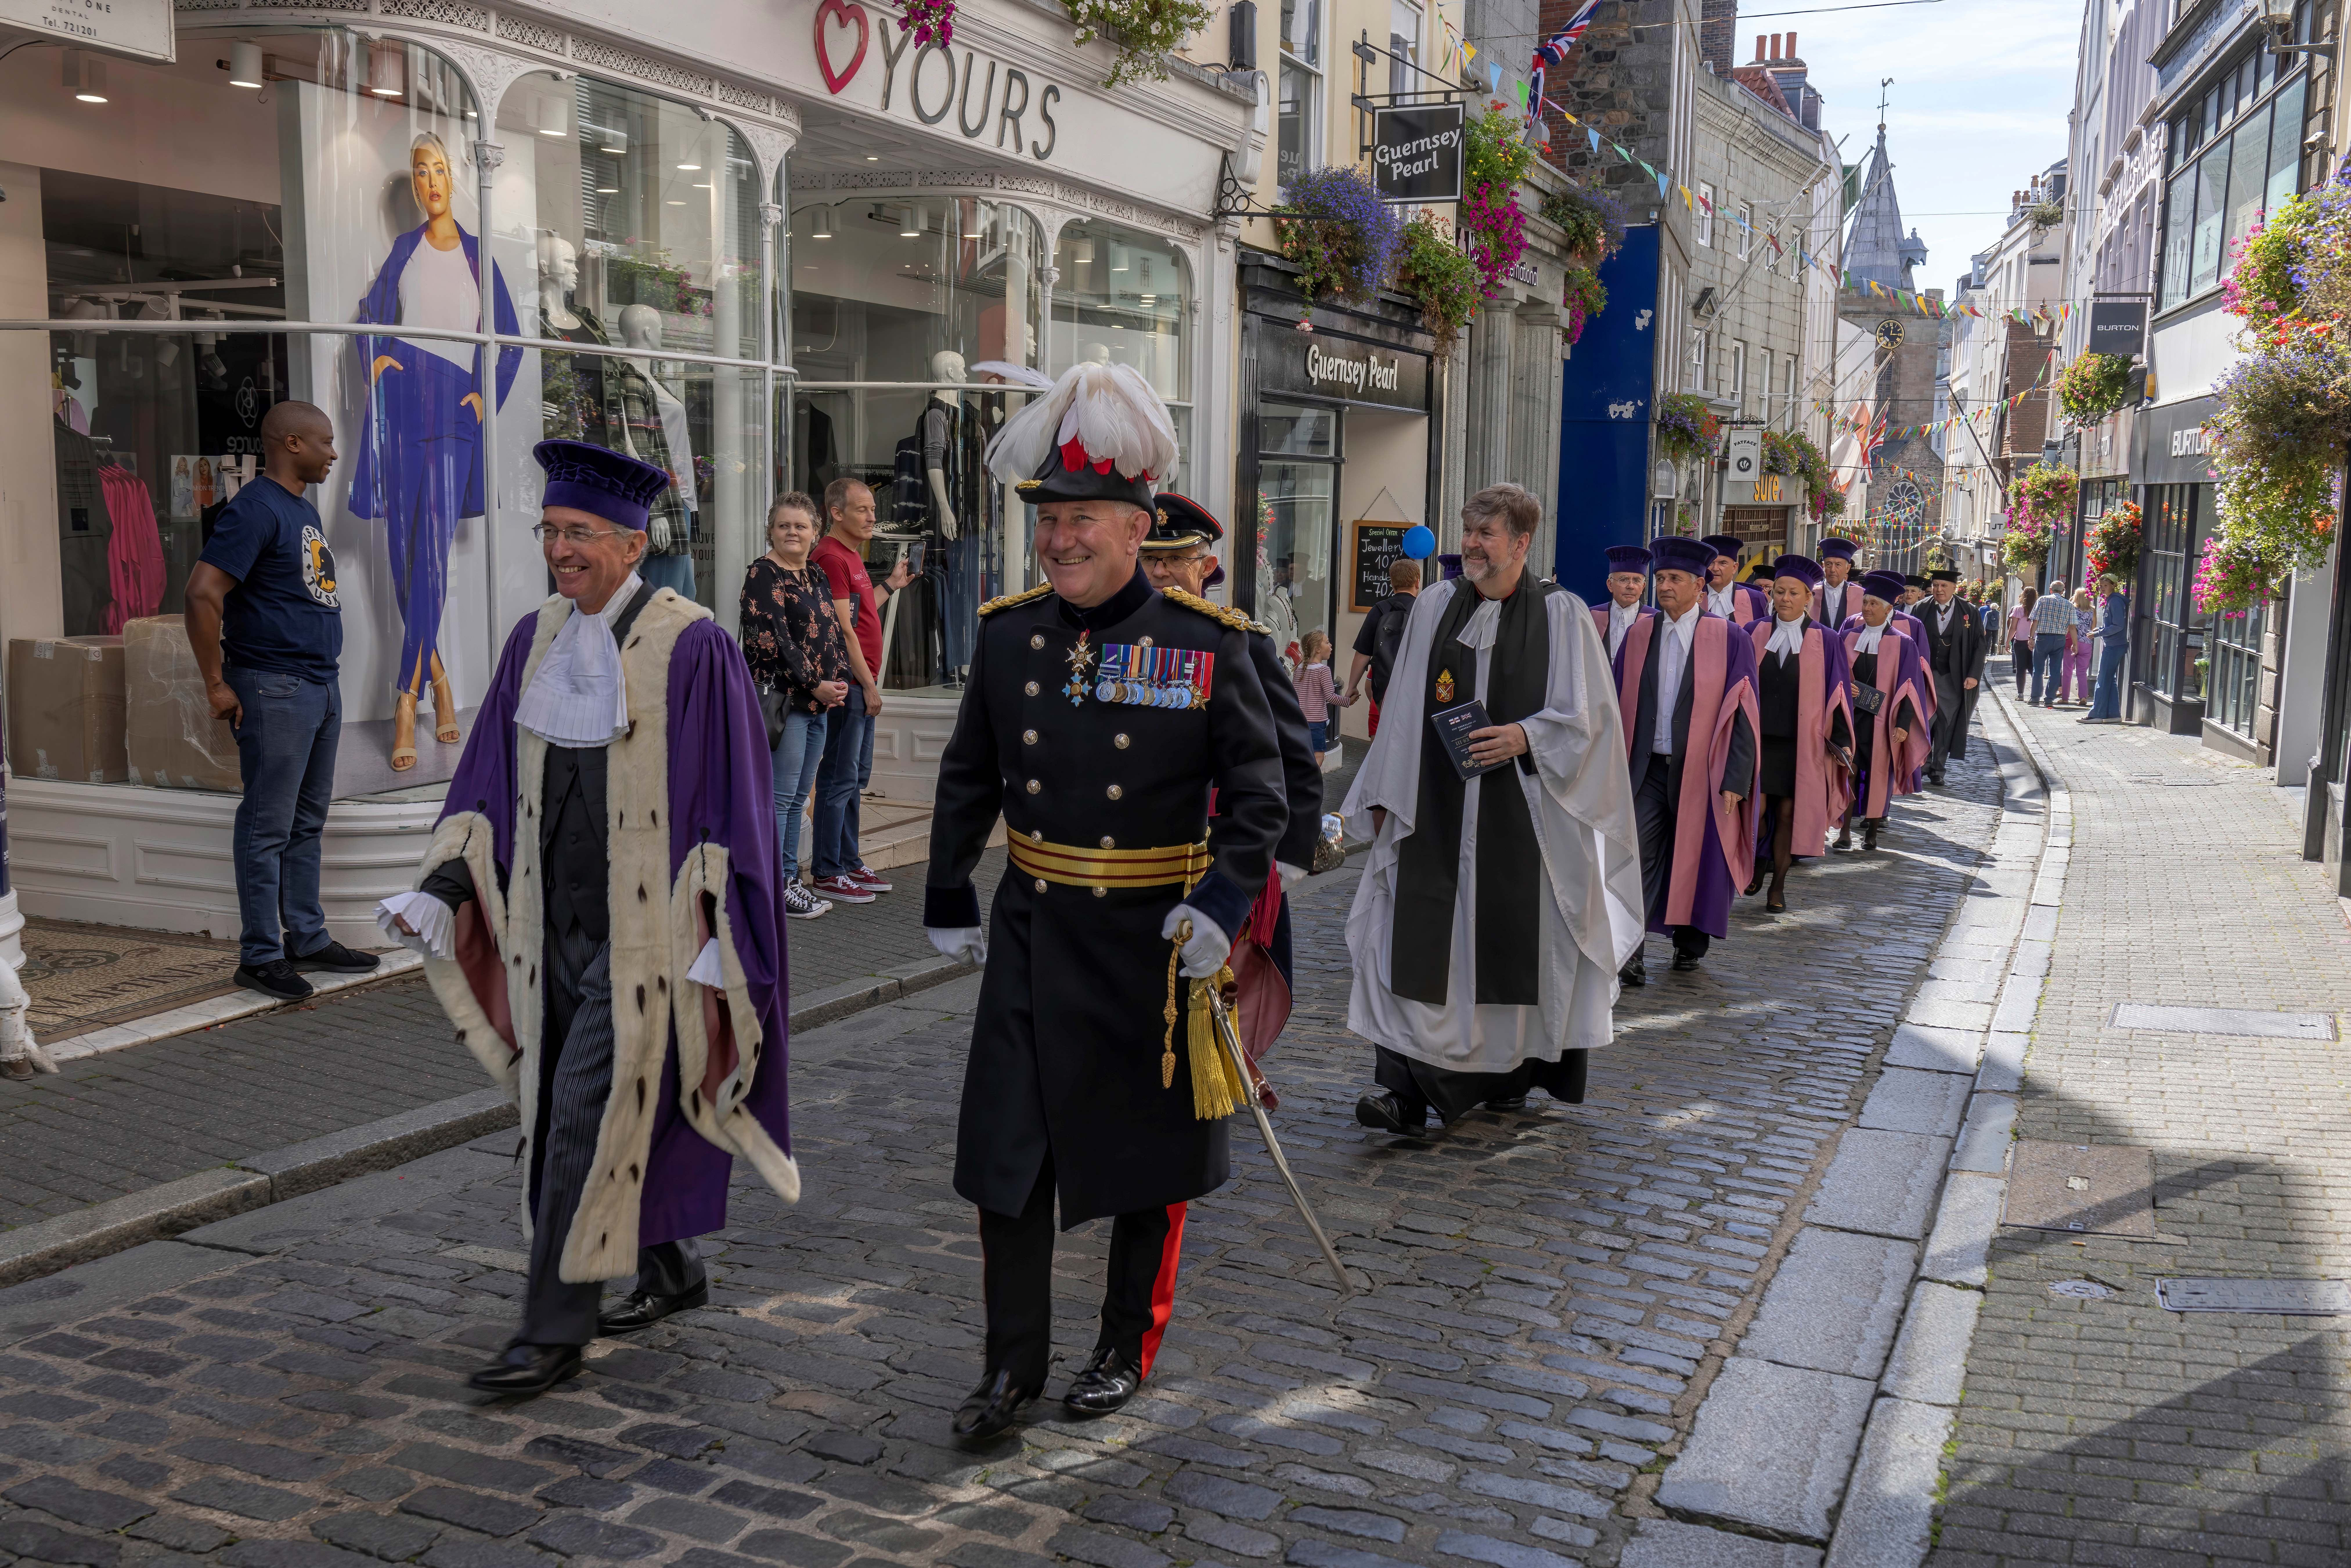 Parade to celebrate the Proclamation of King Charles III September 11 2022. Accompanied by The Bailiff of Guernsey, Sir Richard McMahon and visible also is the Dean of Guernsey The Very Reverend Tim Barker